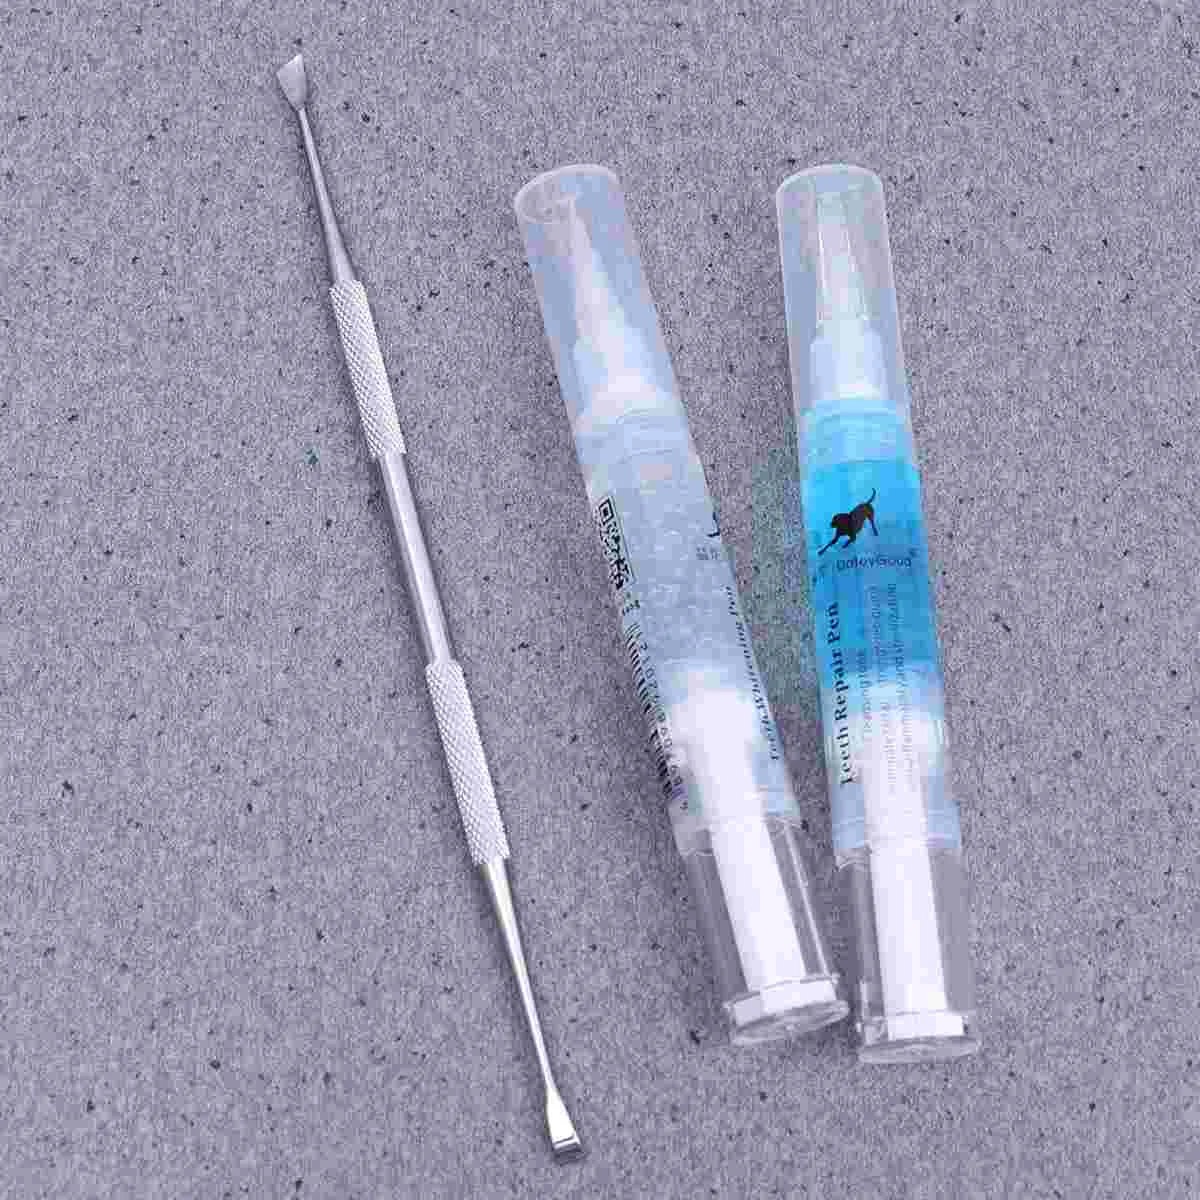 

5ml Teeth Whitening Pen Gel Whitener Oral Hygiene Teeth Stain Repair Pen with Cleaning Pen for Pets Dogs Cats (White)